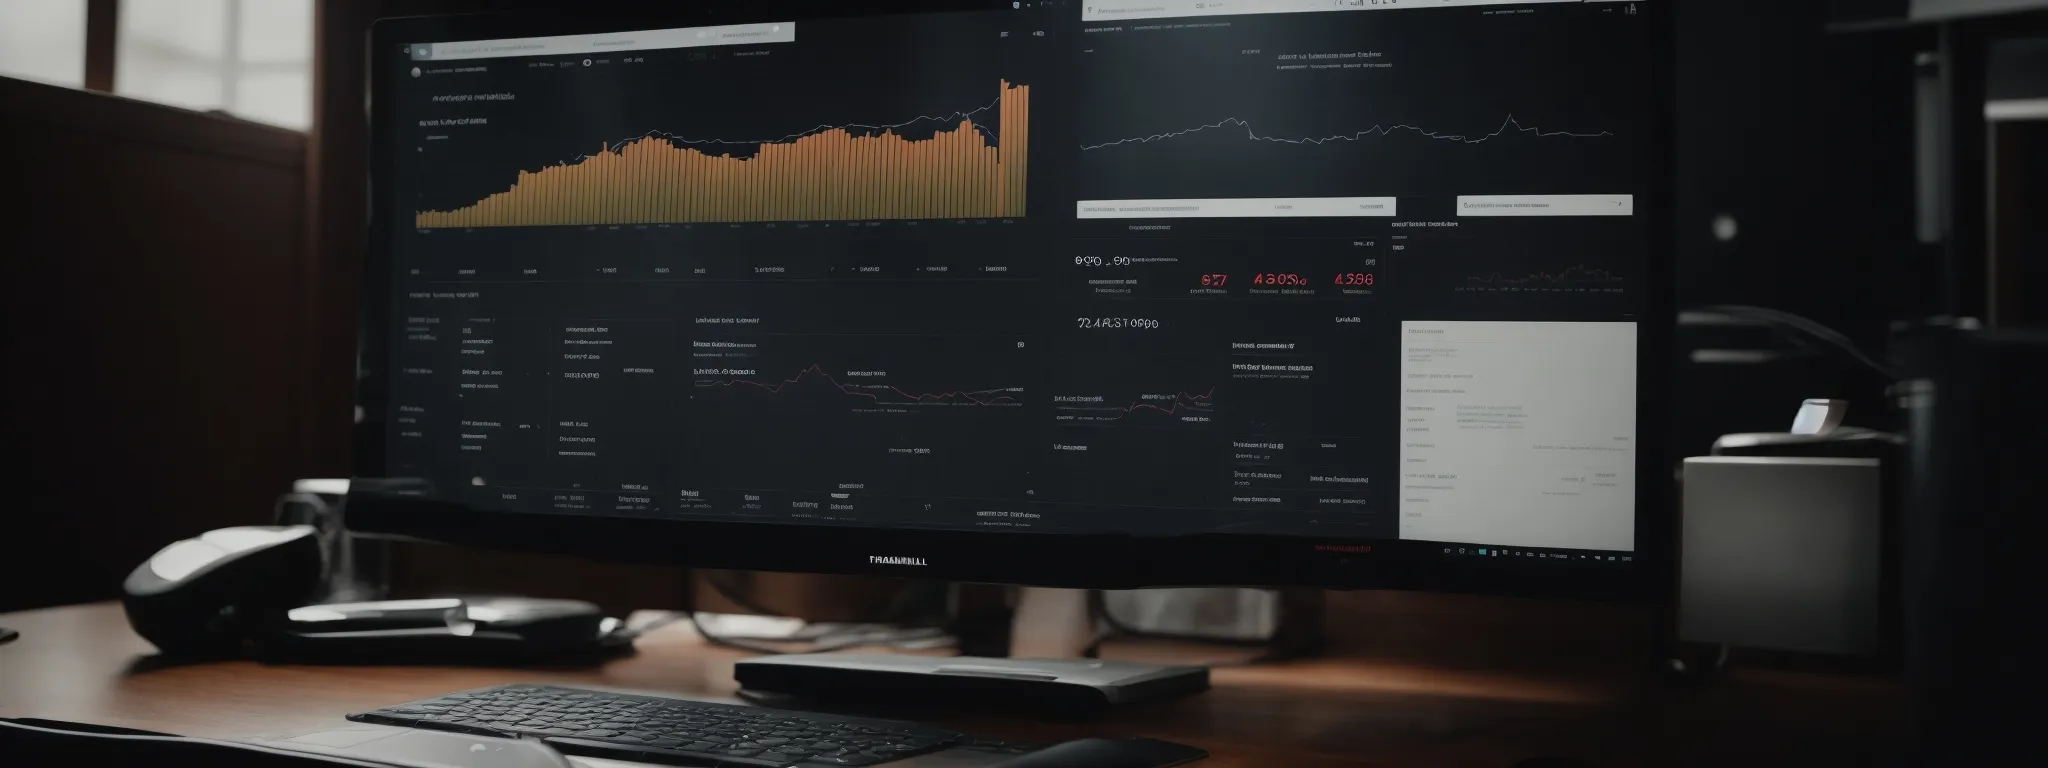 a desktop with an open laptop displaying graphs and analytics.